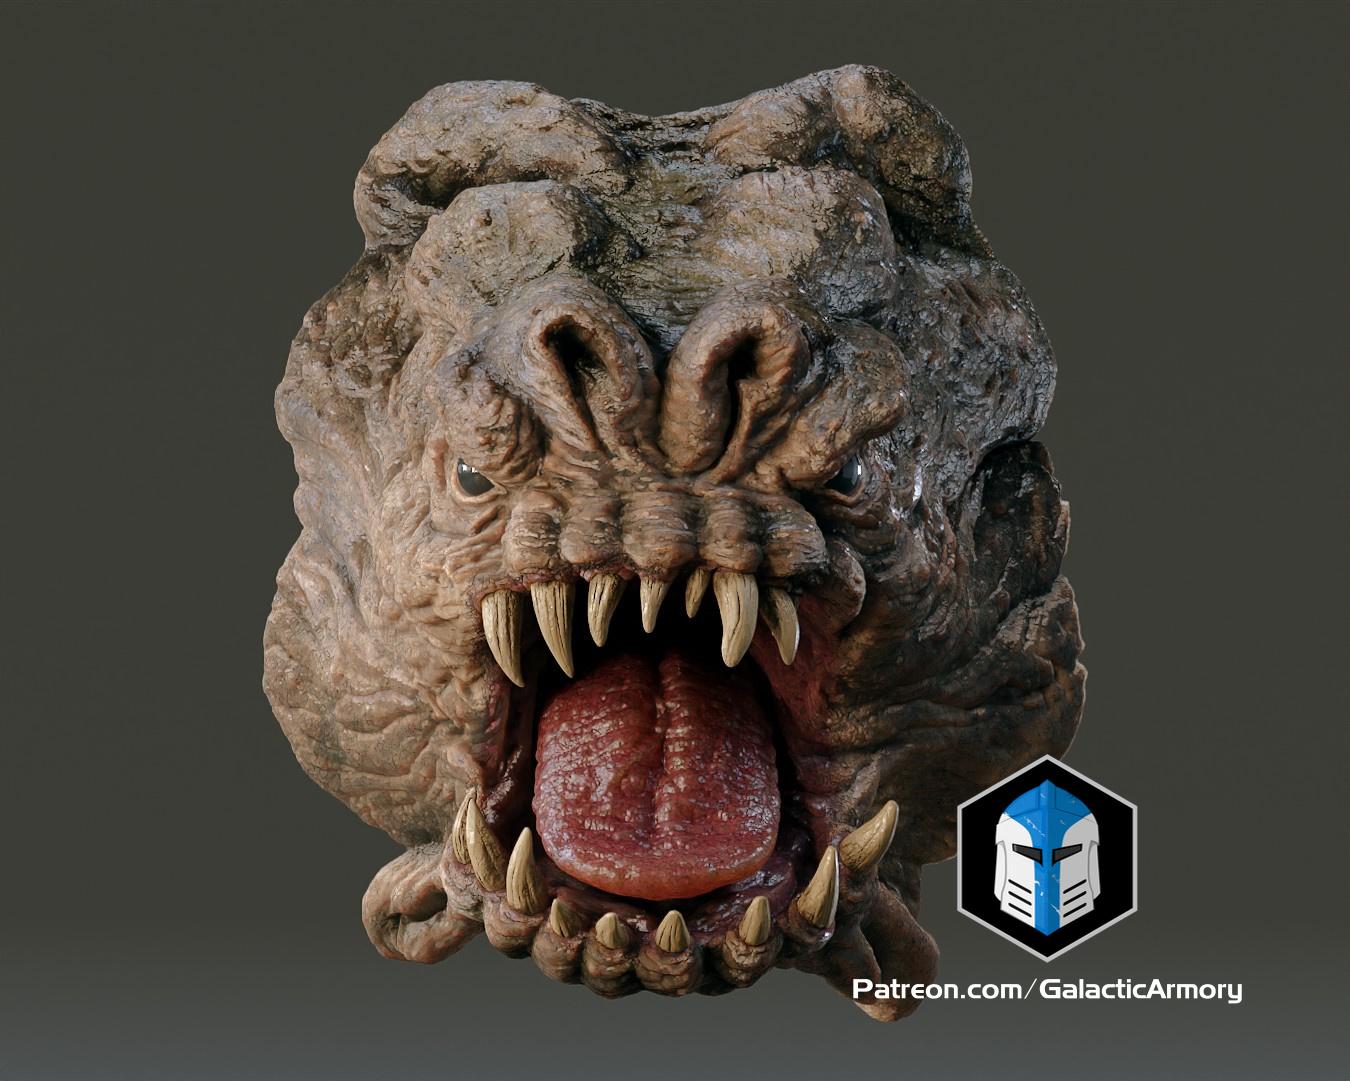 The Life Sized Rancor Wall Mount has been added to the March rewards!